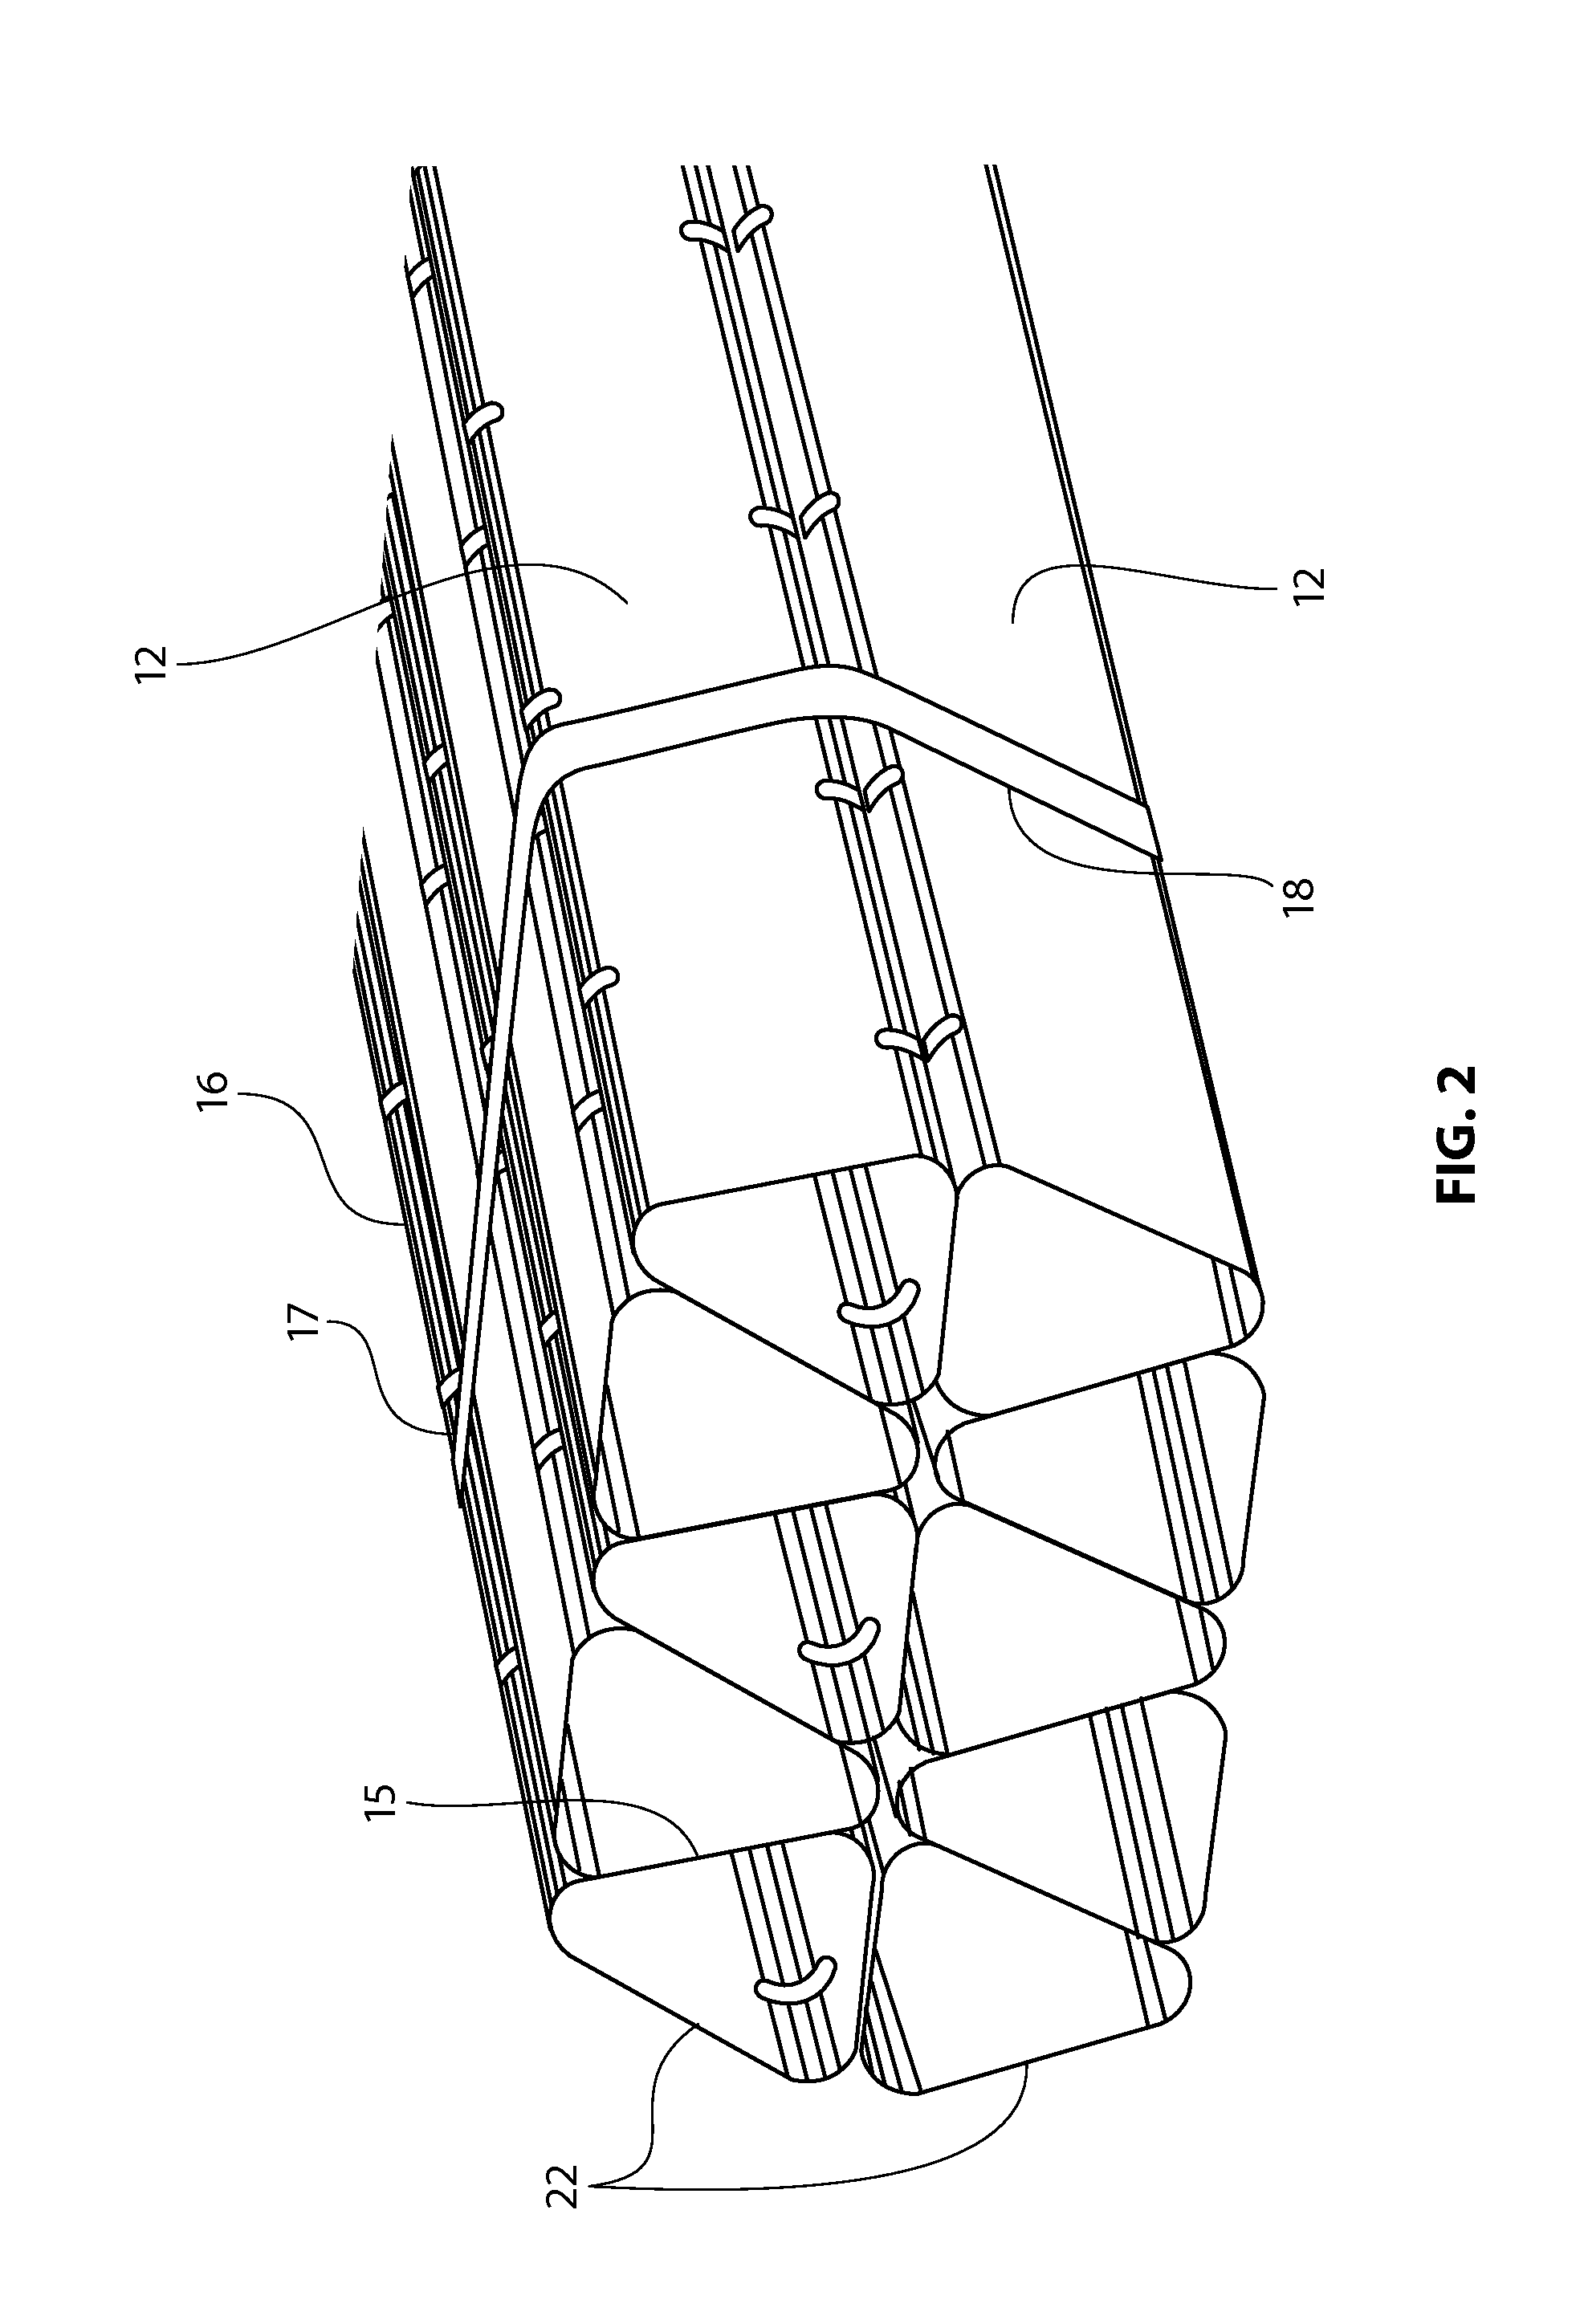 Apparatus and method of supporting underground fluid and water storage and retention systems